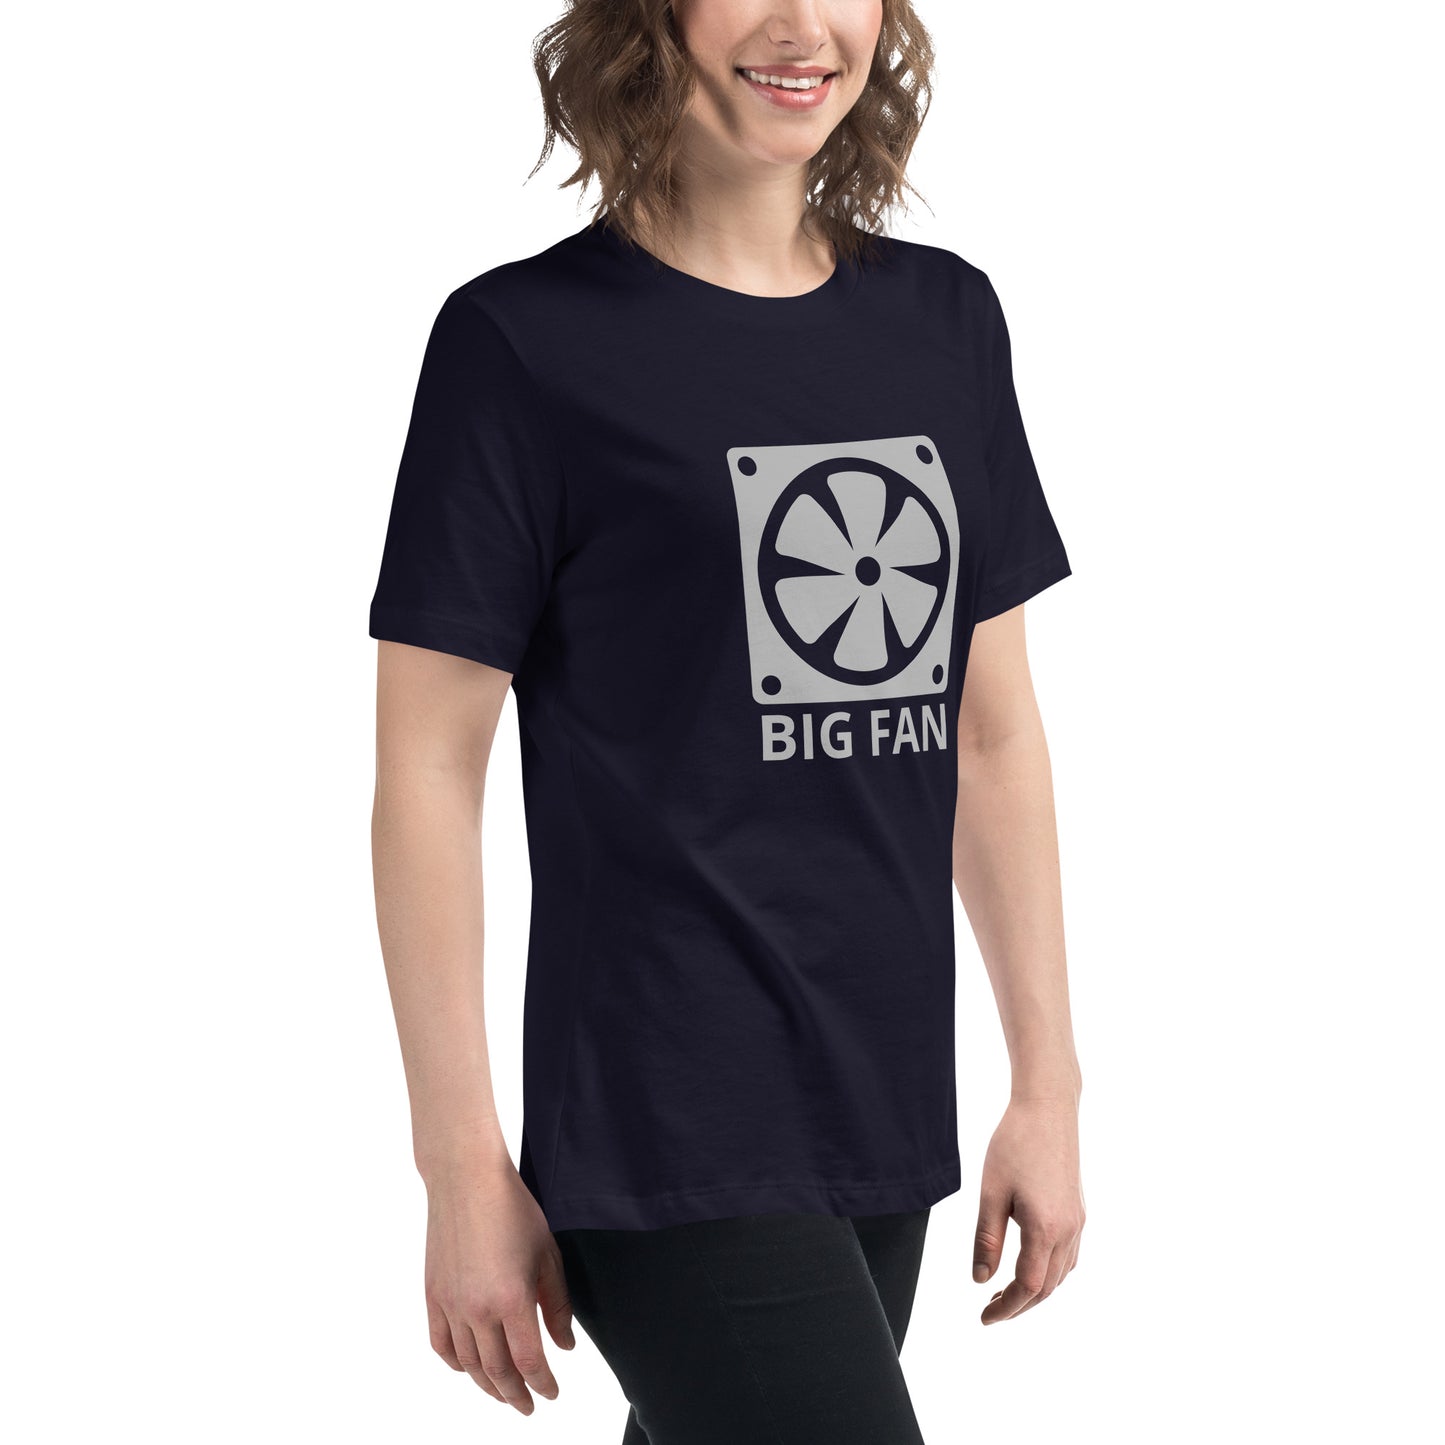 Women with navy blue t-shirt with image of a big computer fan and the text "BIG FAN"